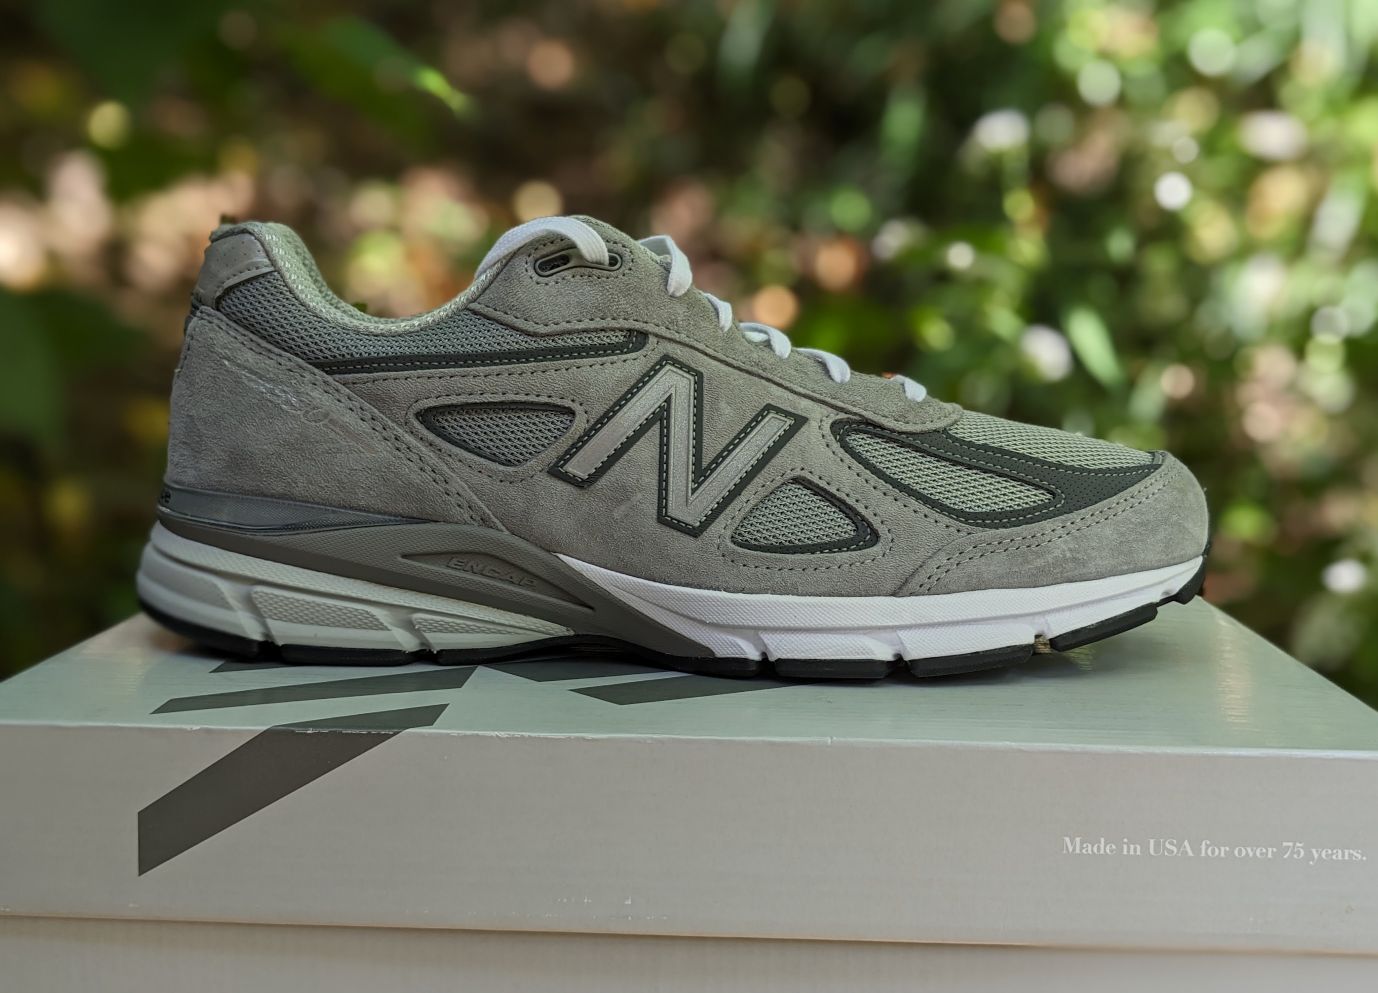 New Balance 990v4: The One Everyone Forgets About